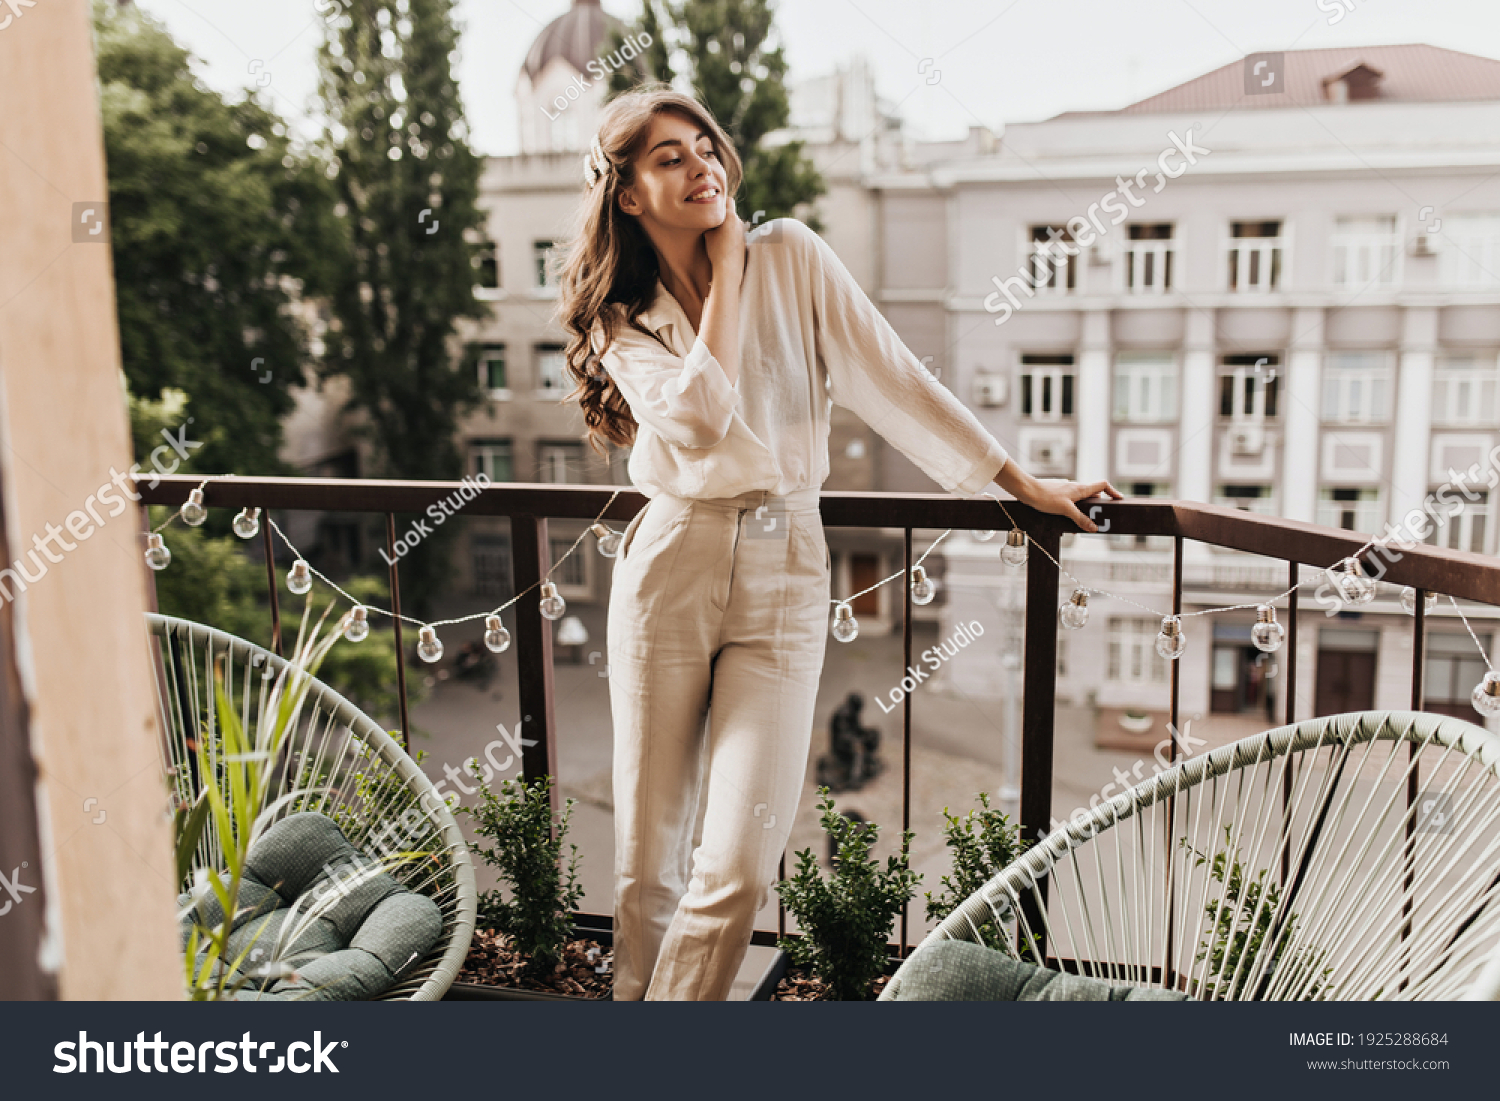 Cool woman in beige outfit smiling on terrace. Happy young lady in stylish pants and shirt poses on balcony and enjoys sunny weather #1925288684